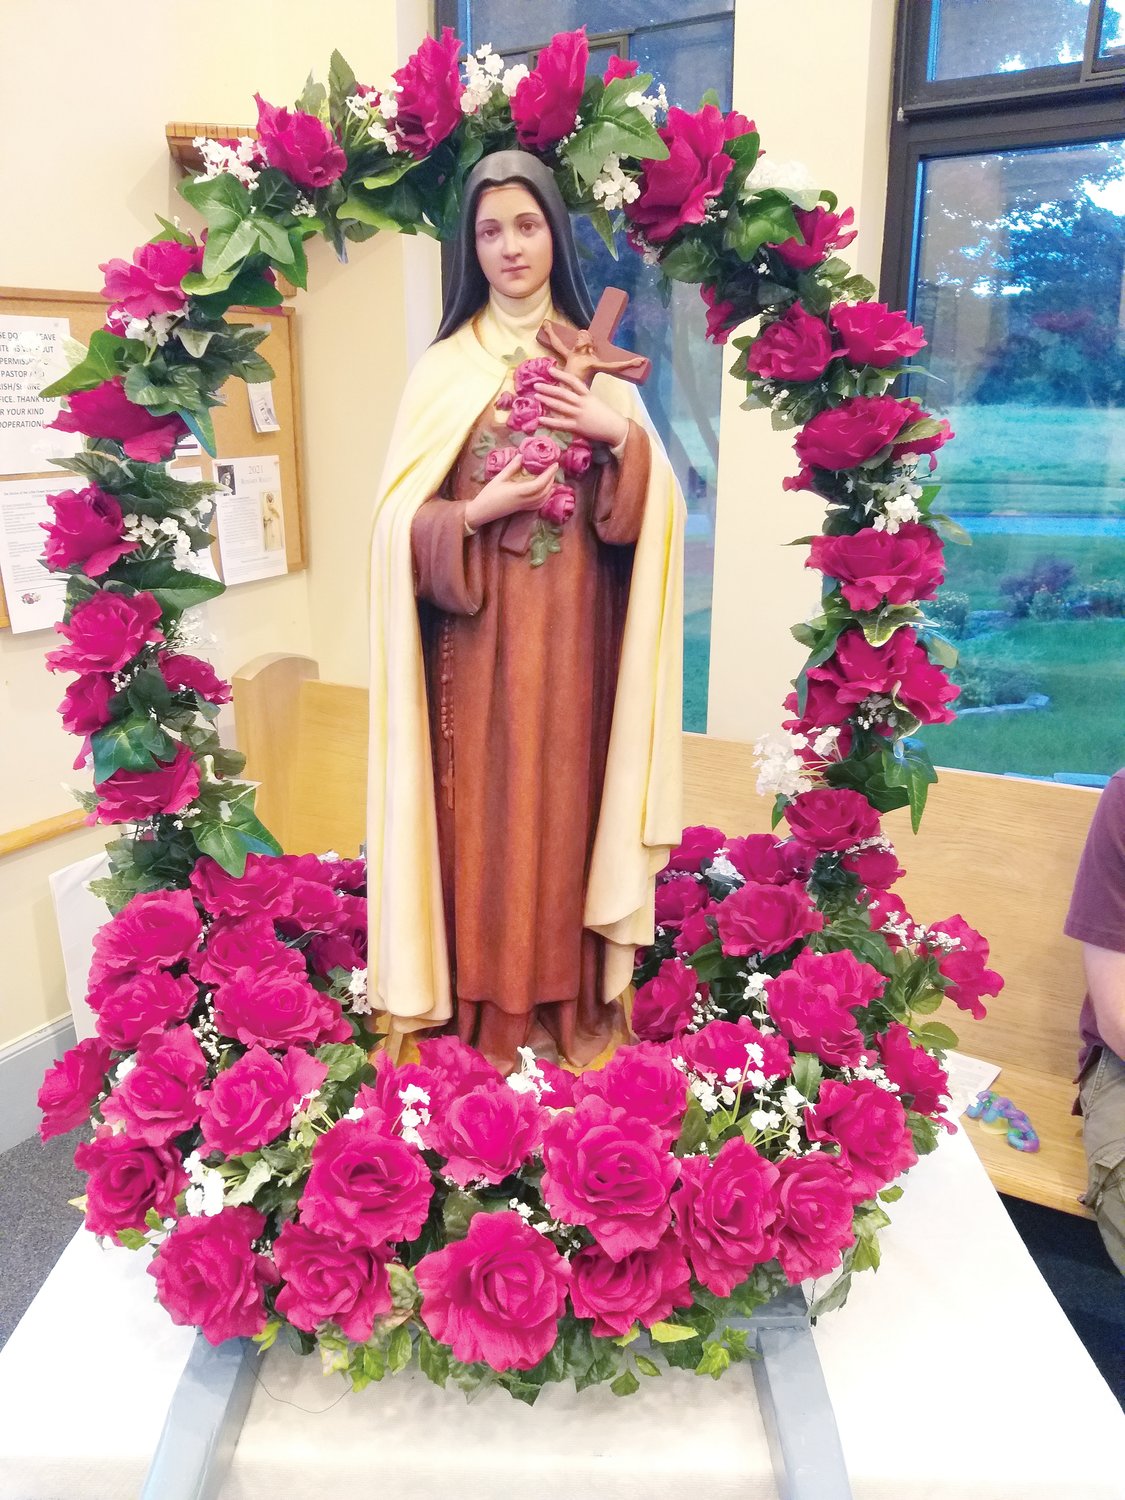 Many visited the Shrine of the Little Flower to celebrate the Feast of Thérèse of Lisieux.